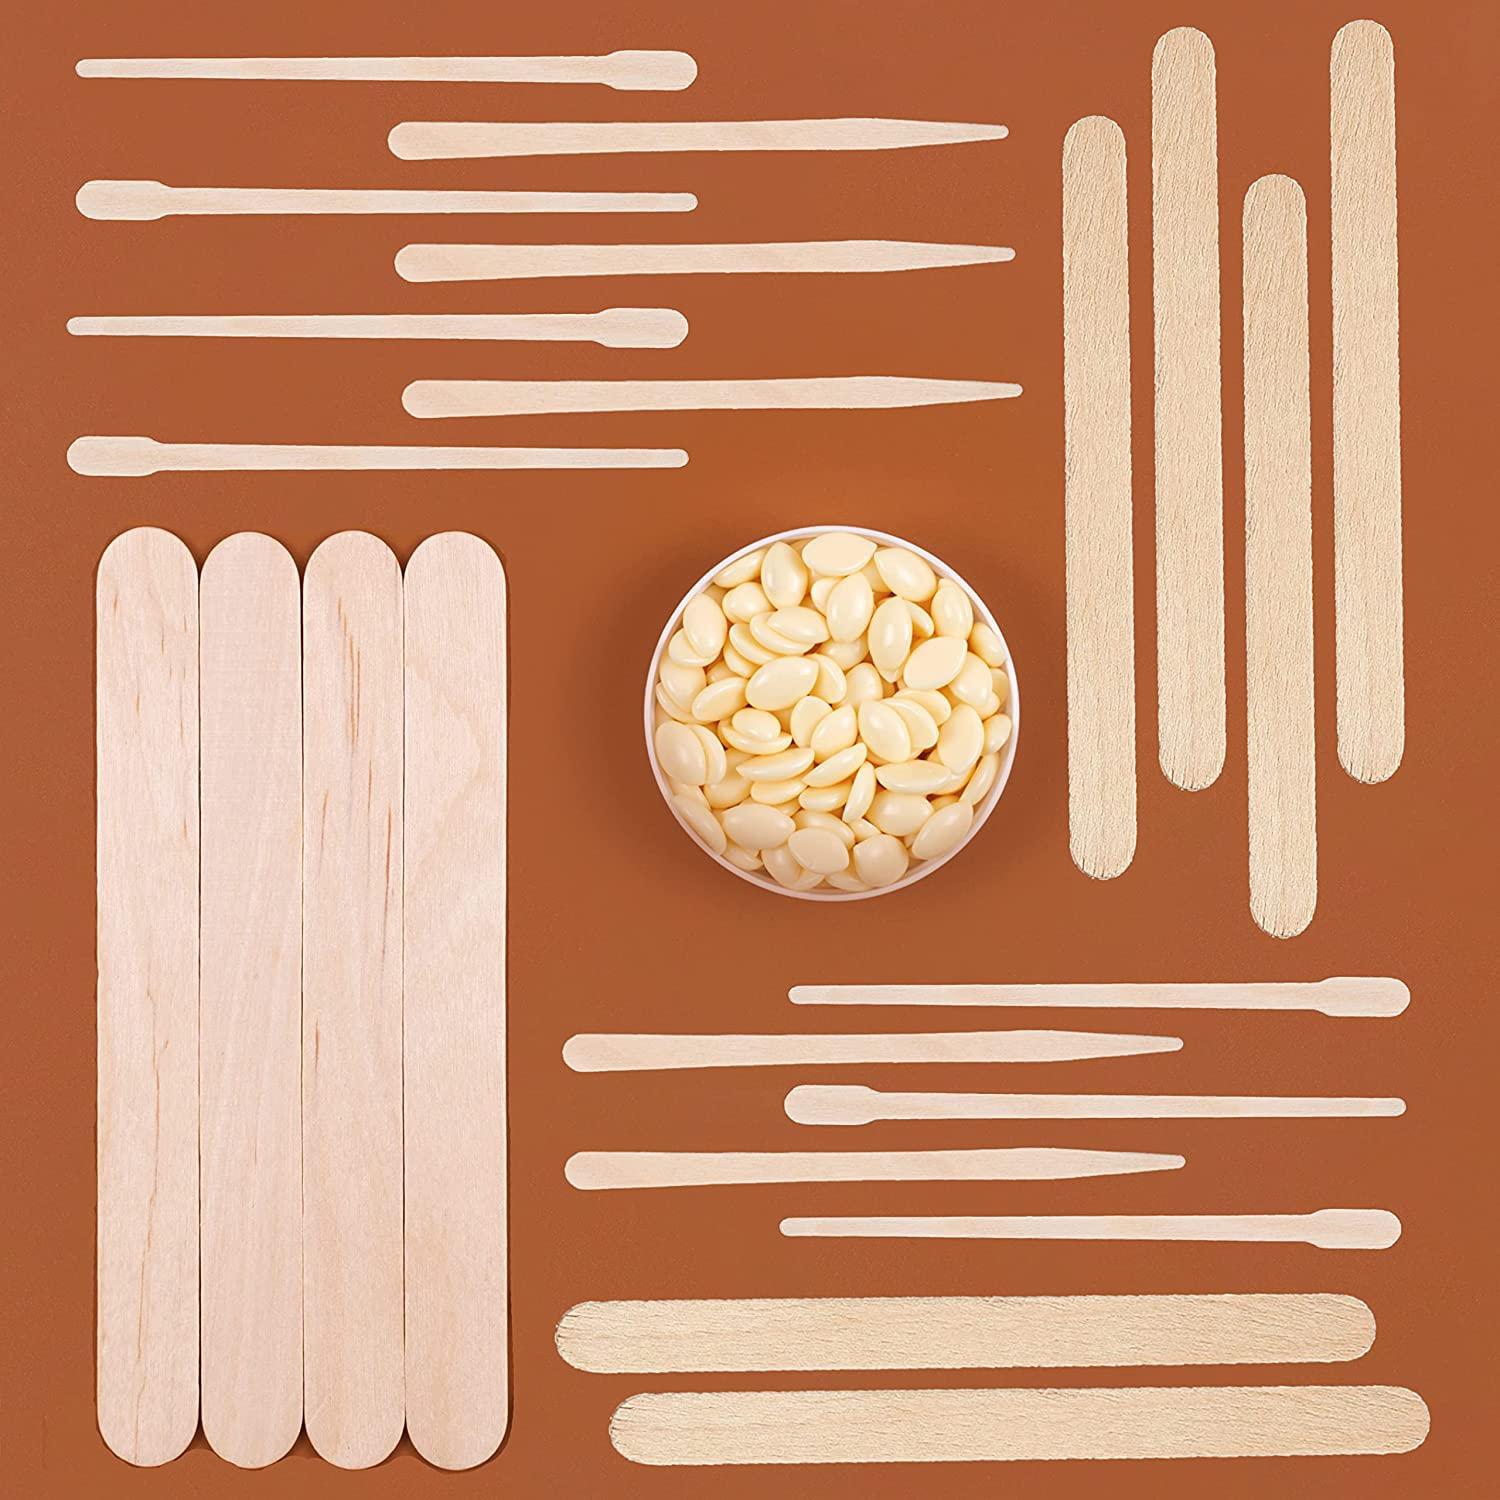 Karlash 100 Pieces Large Wax Sticks Wood Waxing Craft Sticks Spatulas Applicators for Hair Removal Eyebrow and Body